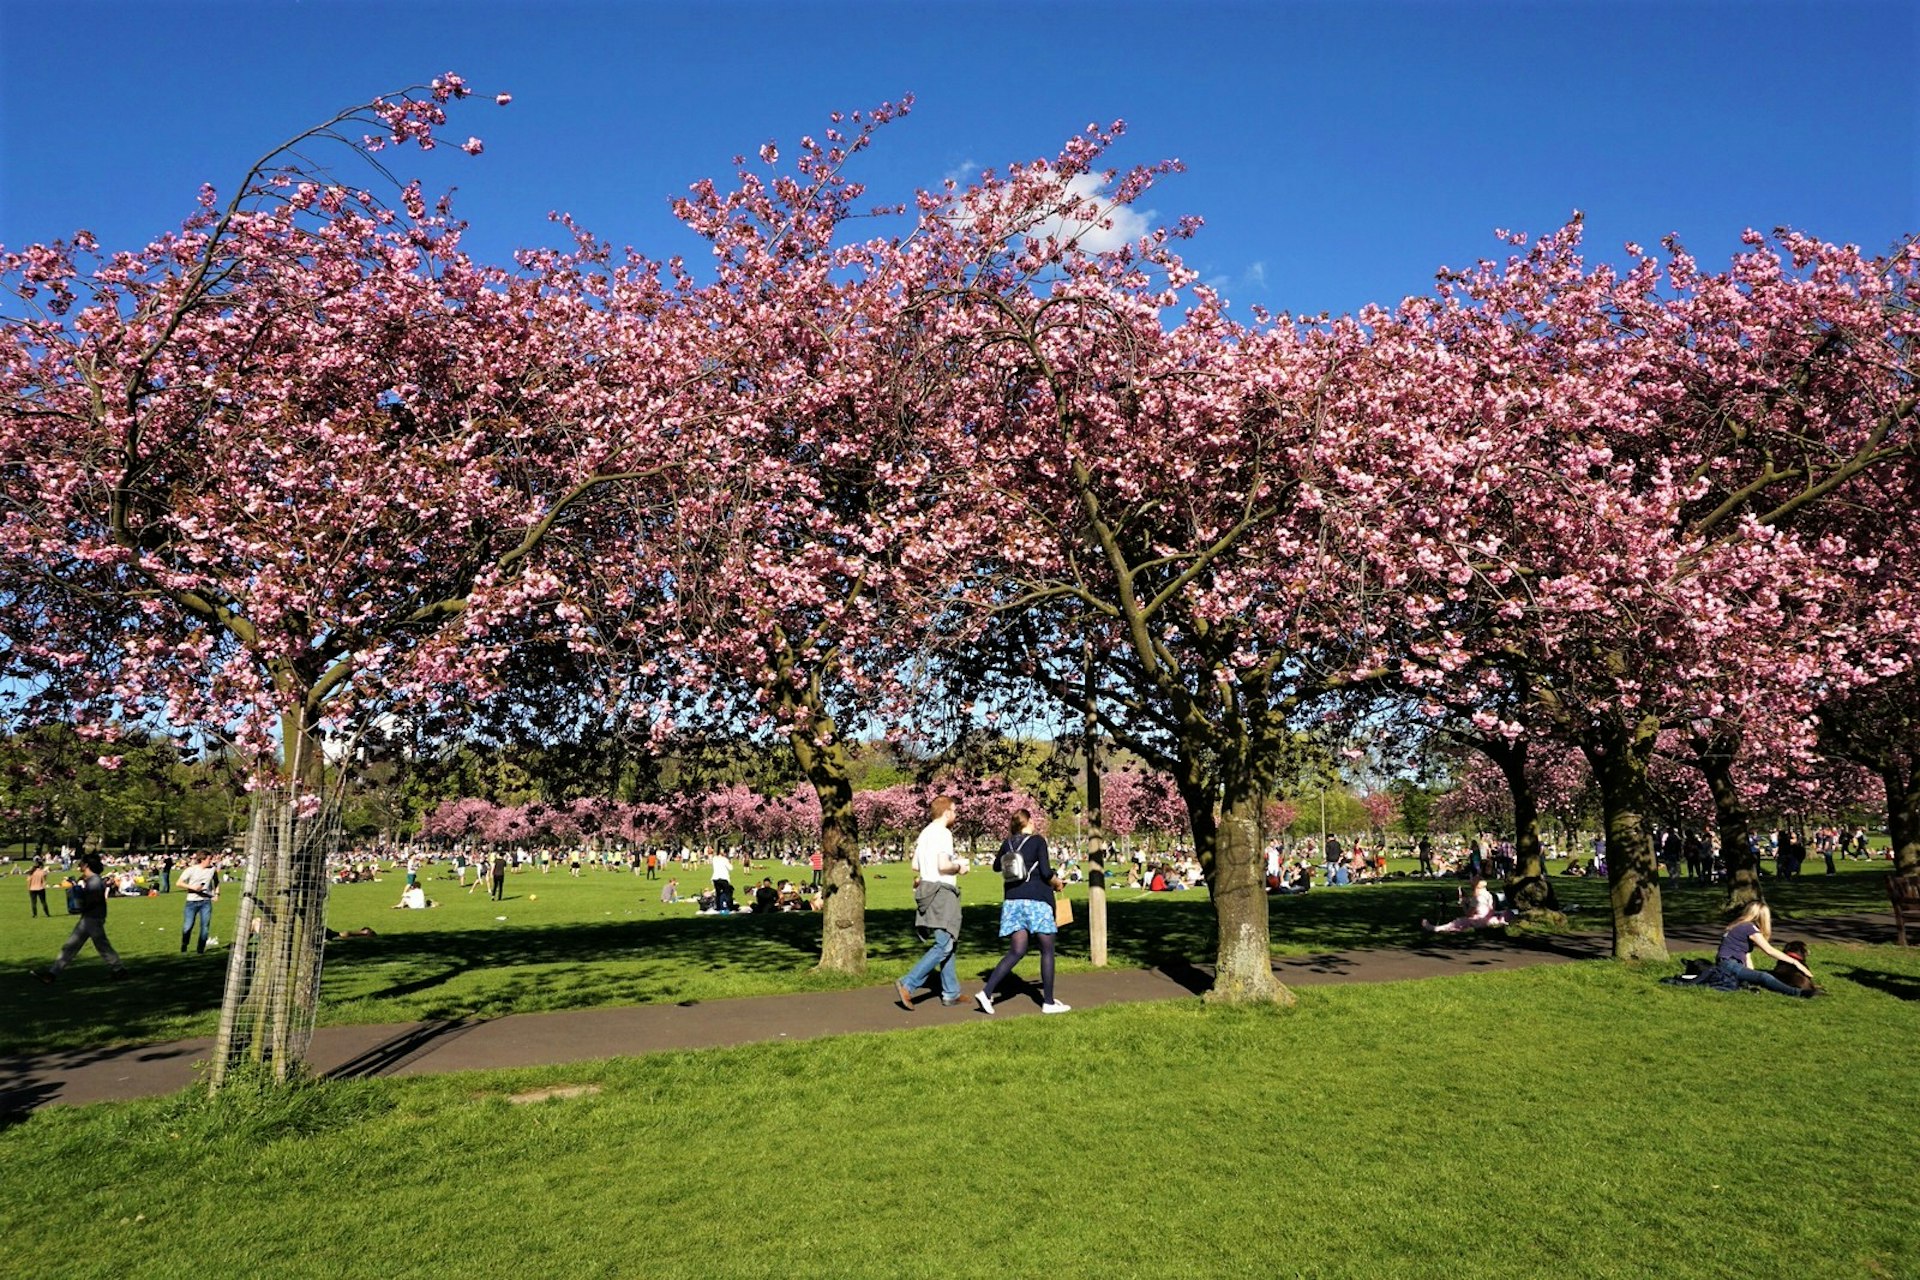 People walk through the Meadows under the cherry blossom.